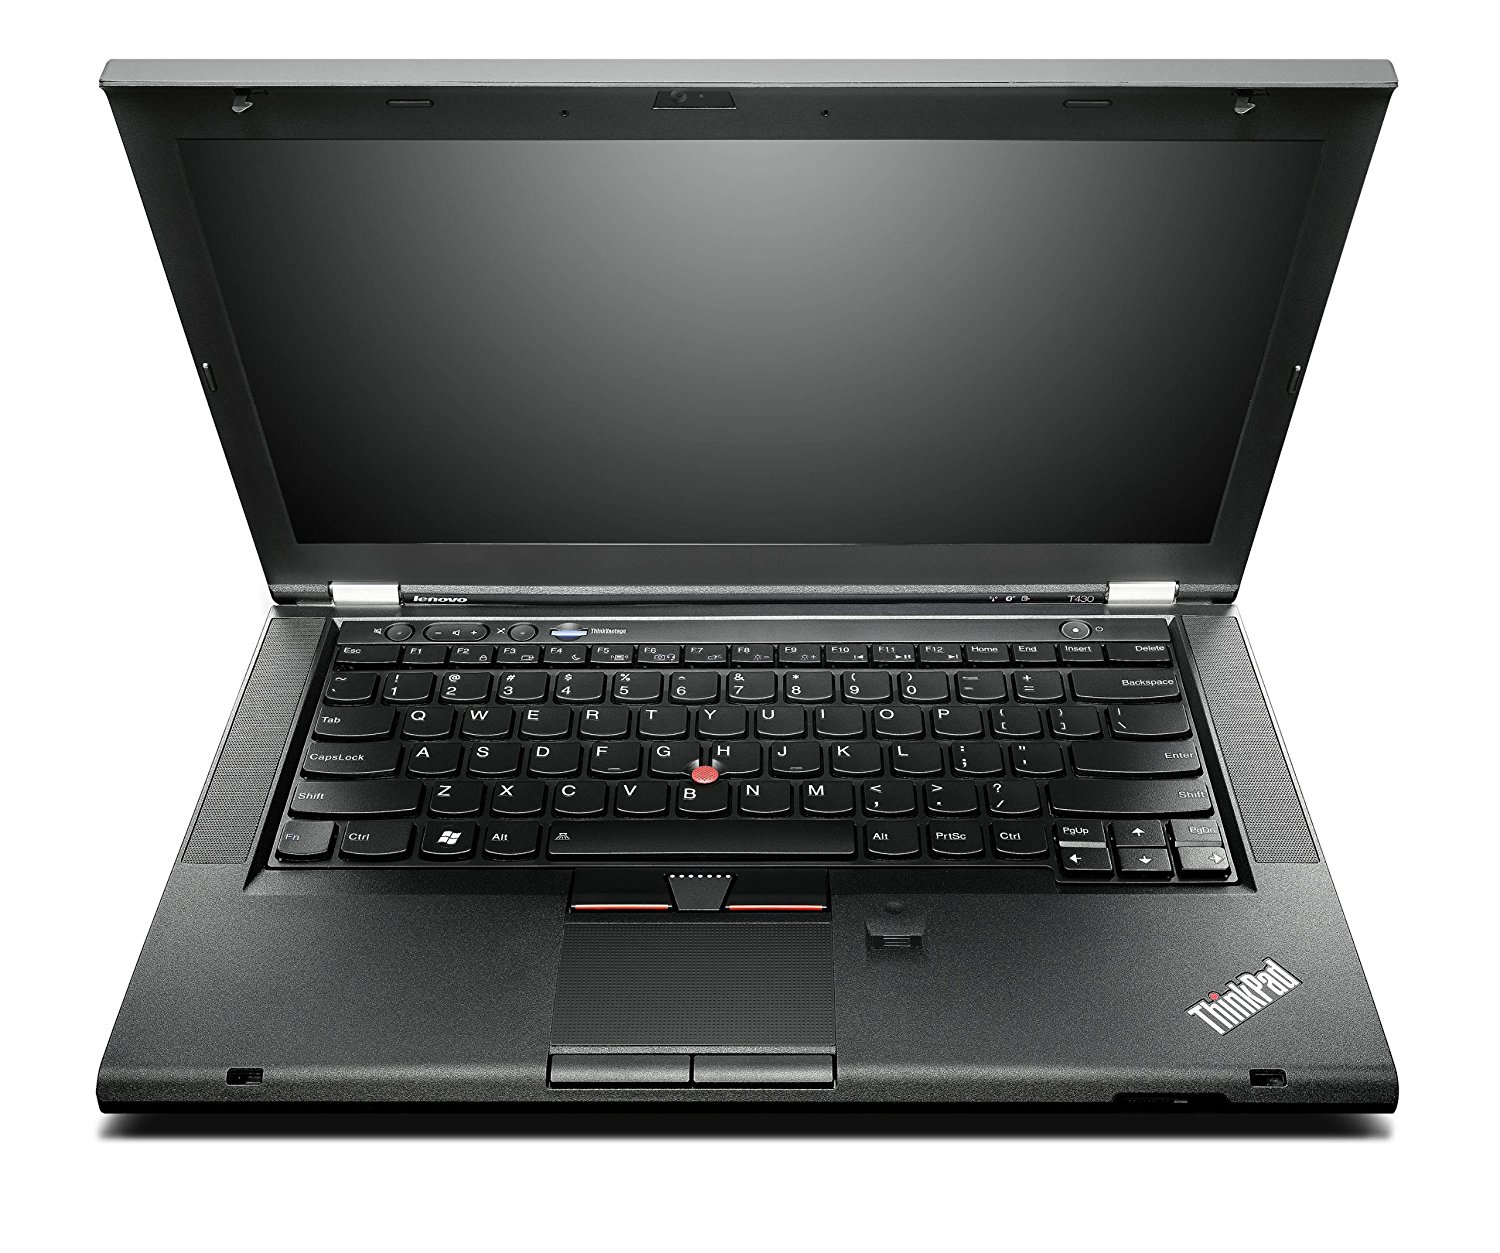 Pre-Owned Lenovo Thinkpad T430 Laptop, Pre Owned Laptop with Windows 10 PRO License , PreOwned Laptop with Windows 10 PRO License,Microsoft Authorized Refurb Laptops